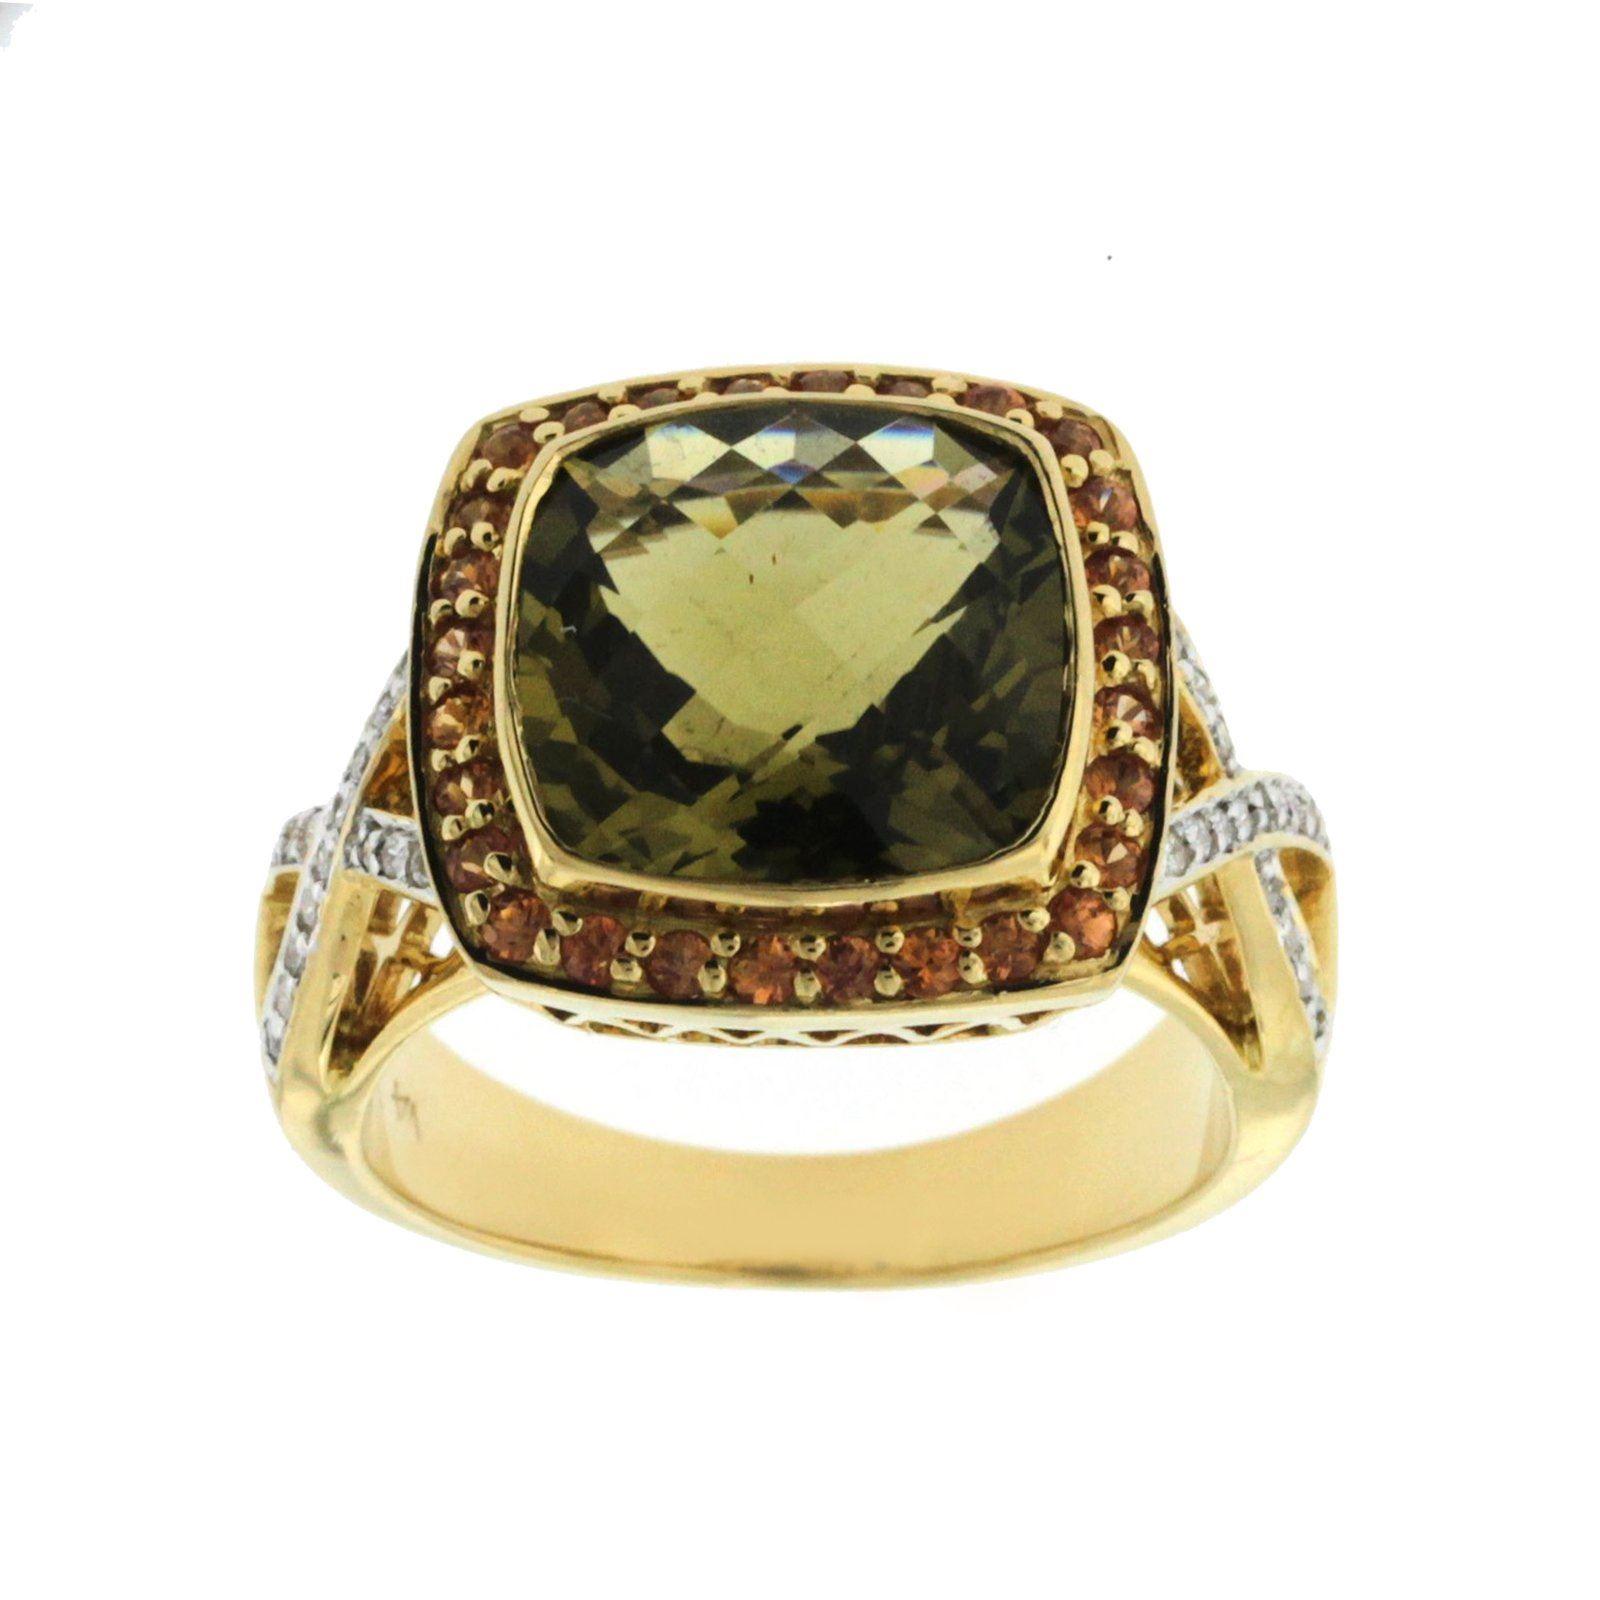 Top: 15 mm
Band Width: 3.5 mm
Metal: 18K Yellow Gold
Size: 6-8
Hallmarks: 18K
Total Weight: 6.2 Grams
Stone Type: Green and Orange Quartz with Diamonds
Condition: Pre Owned
Estimated Retail Price: $3700
Stock Number: 30-02214